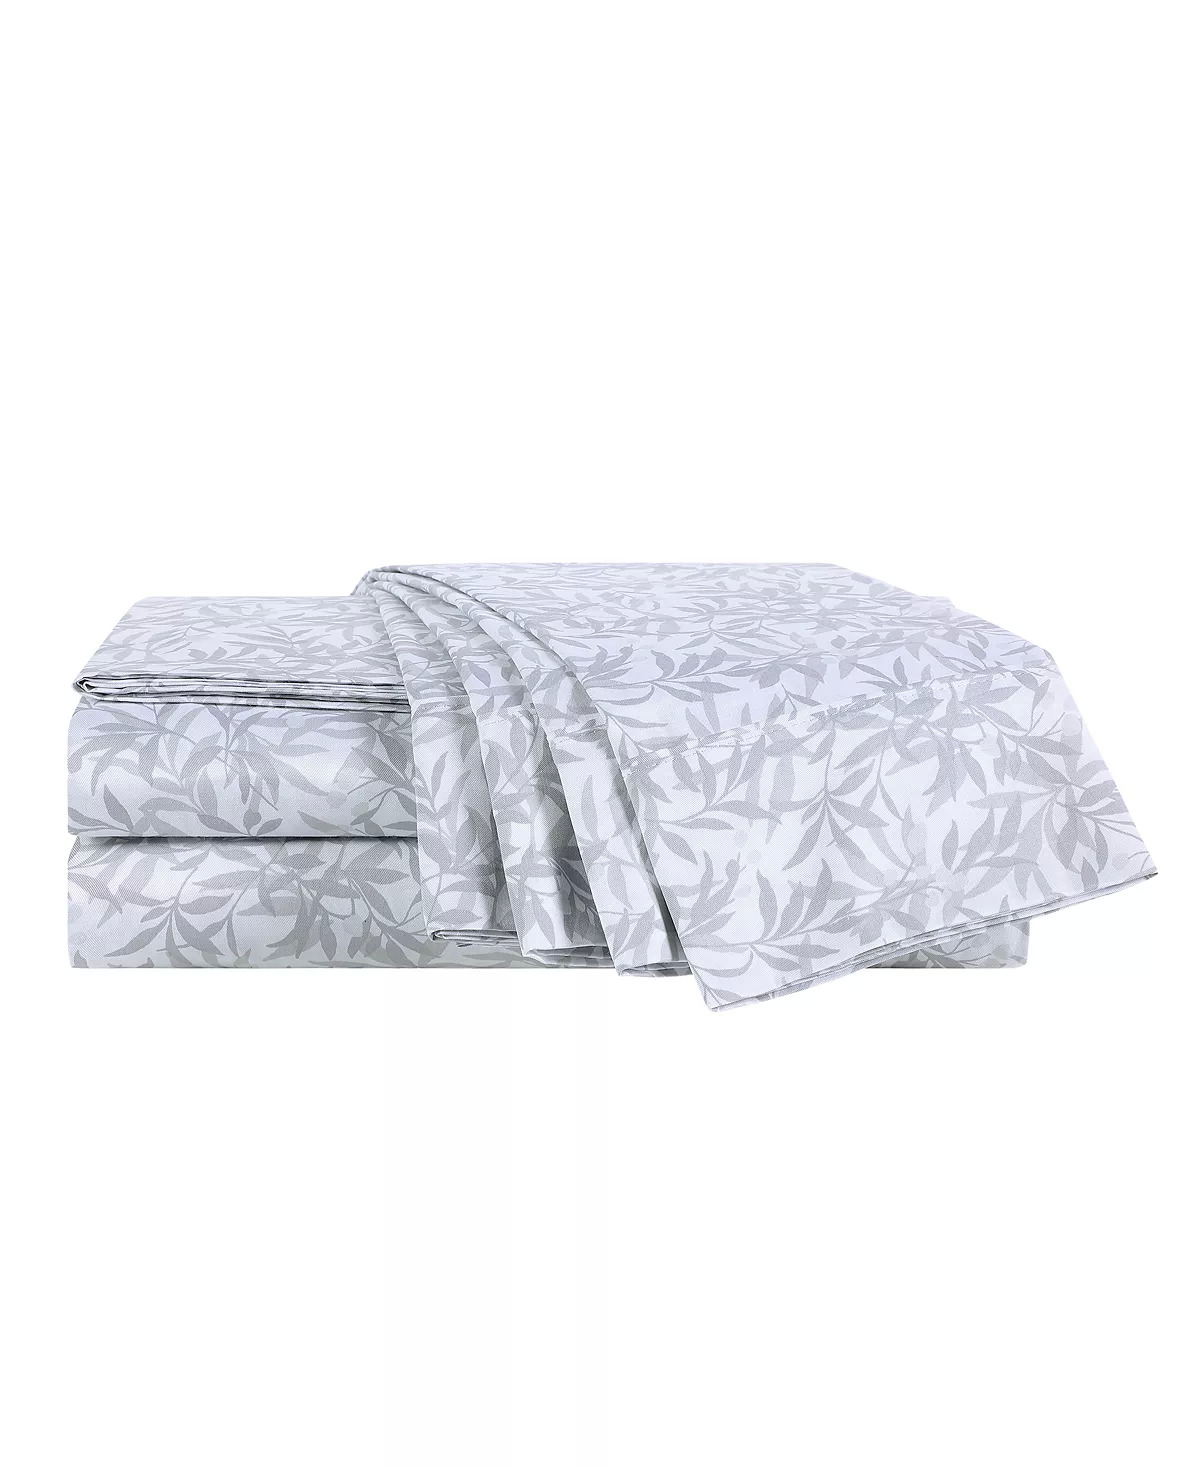 6-Piece Wellbeing by Sunham Antimicrobial Sheet Set (Queen, 3 Colors) $16.46 + Free Store Pickup at Macy's or F/S on Orders $25+